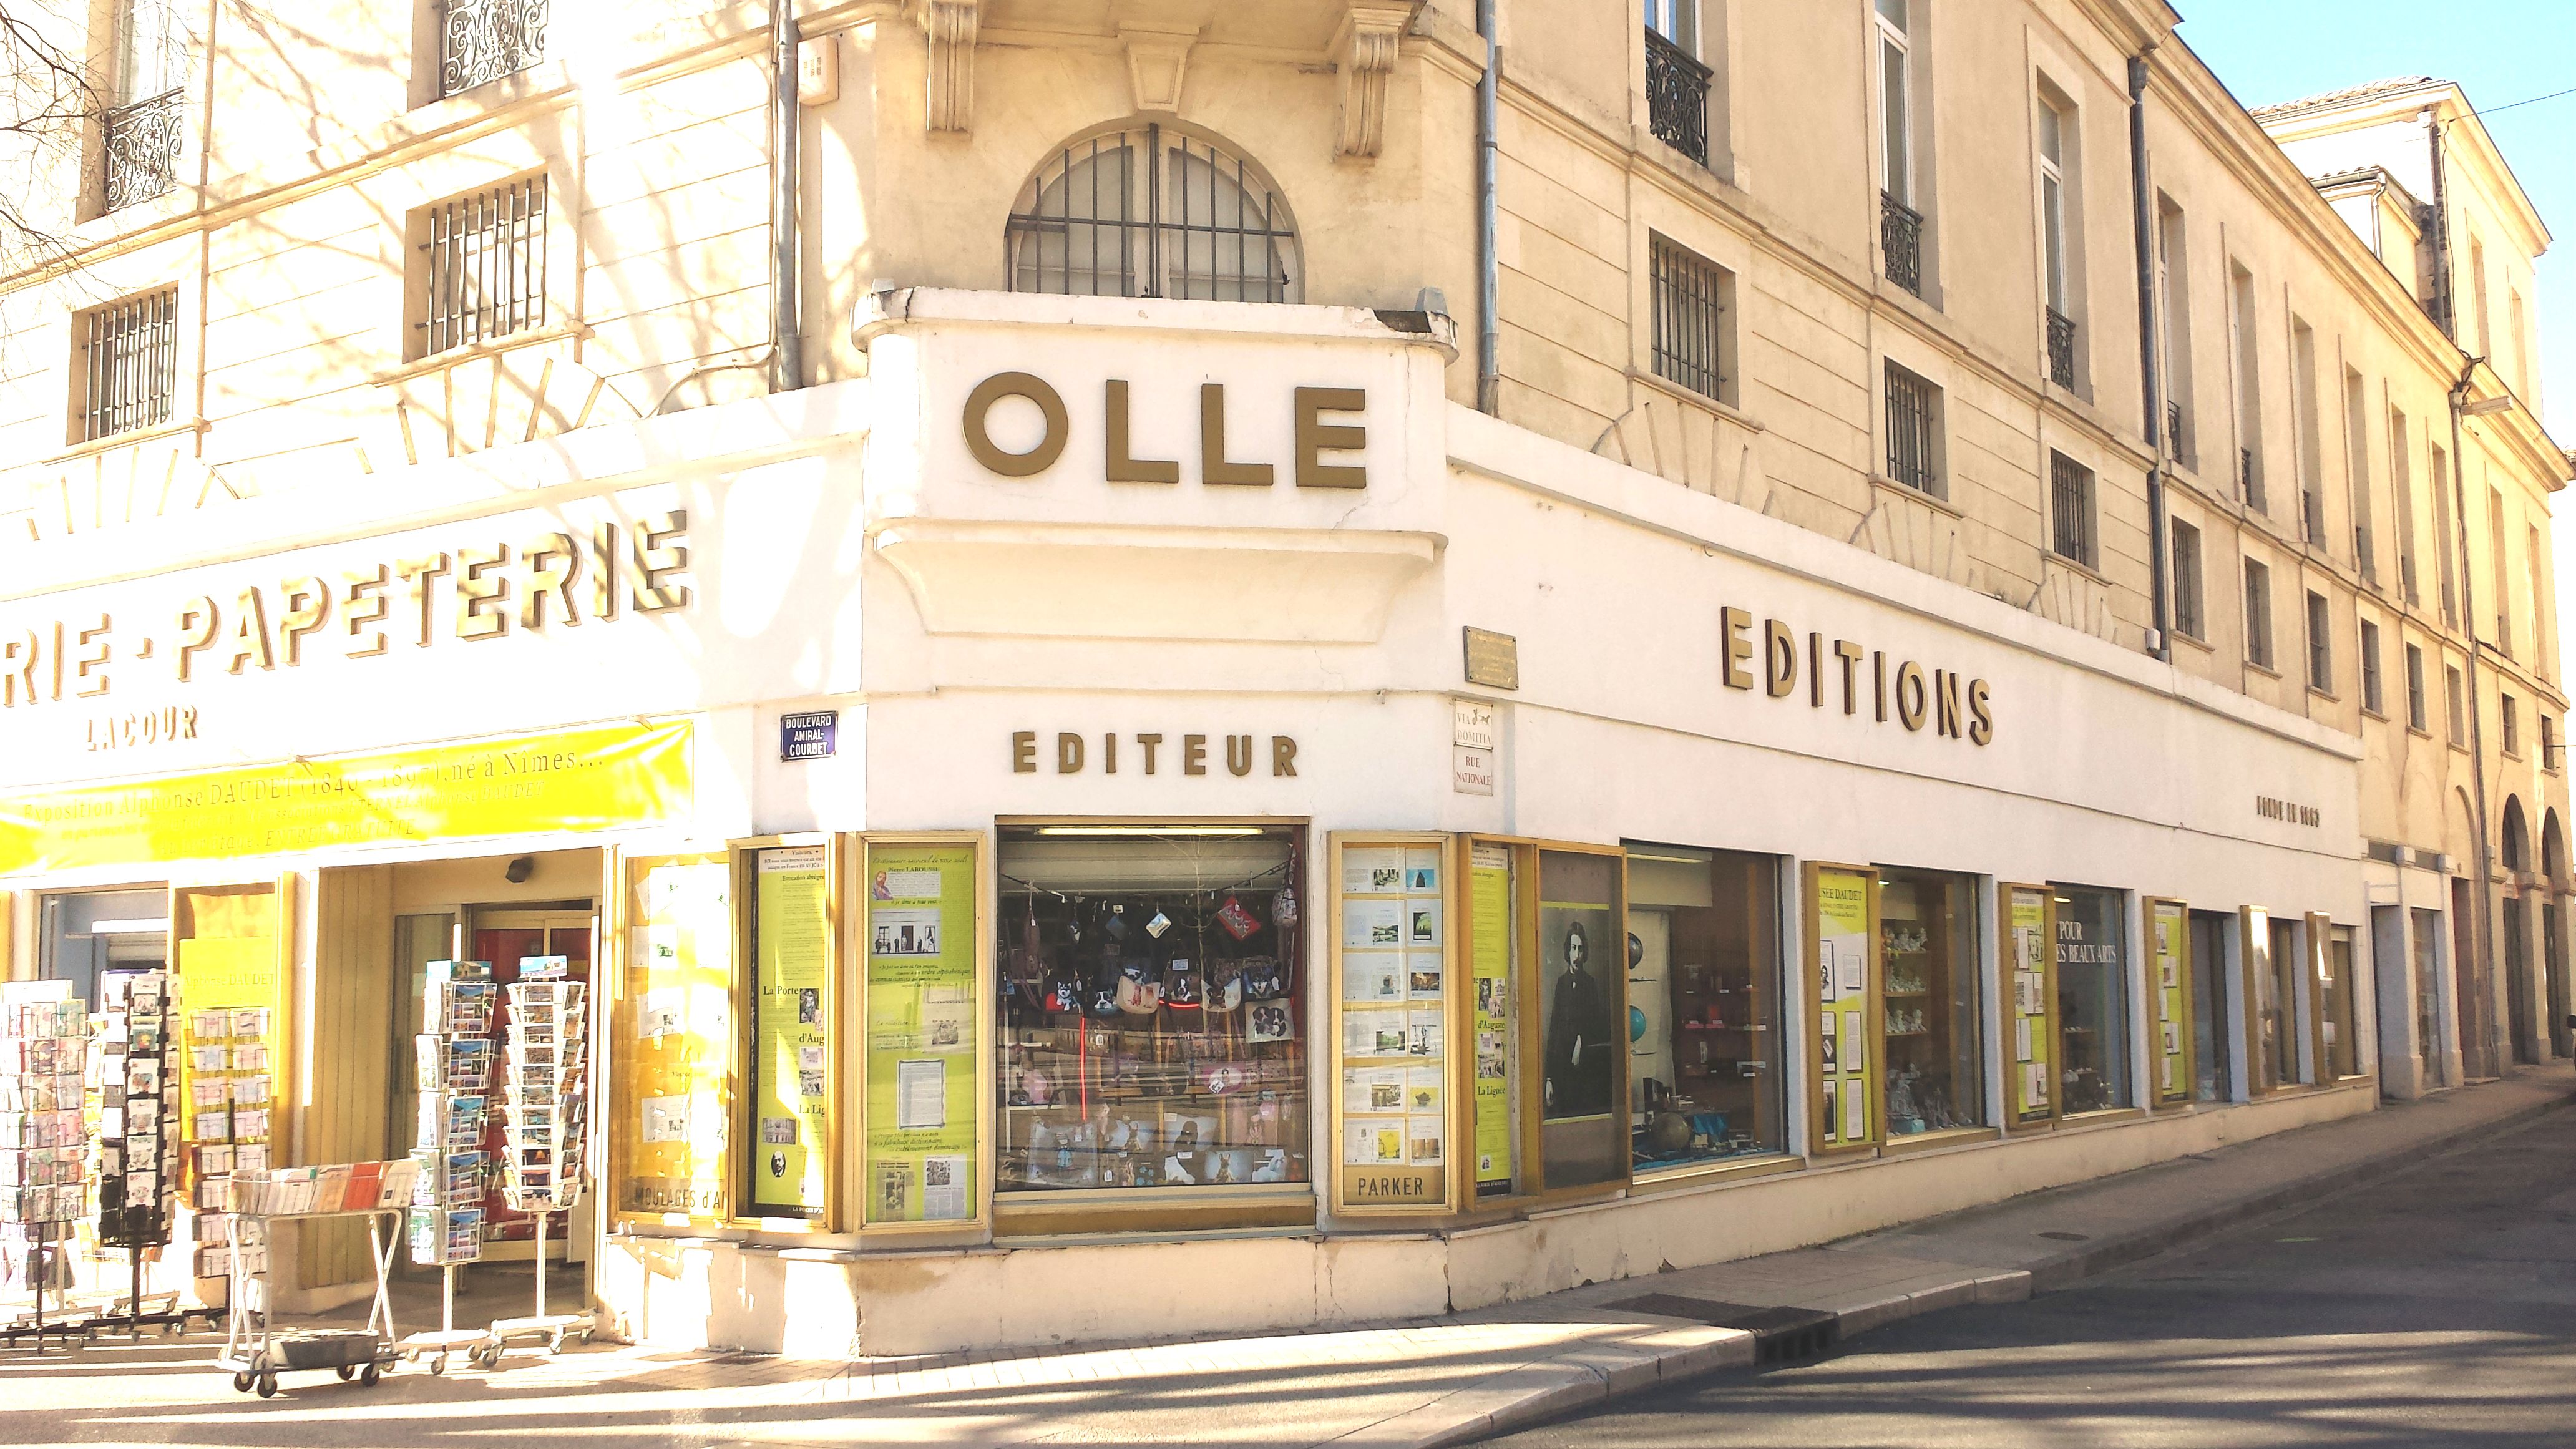 Editions-librairie-papeterie-lacour-olle-nimes